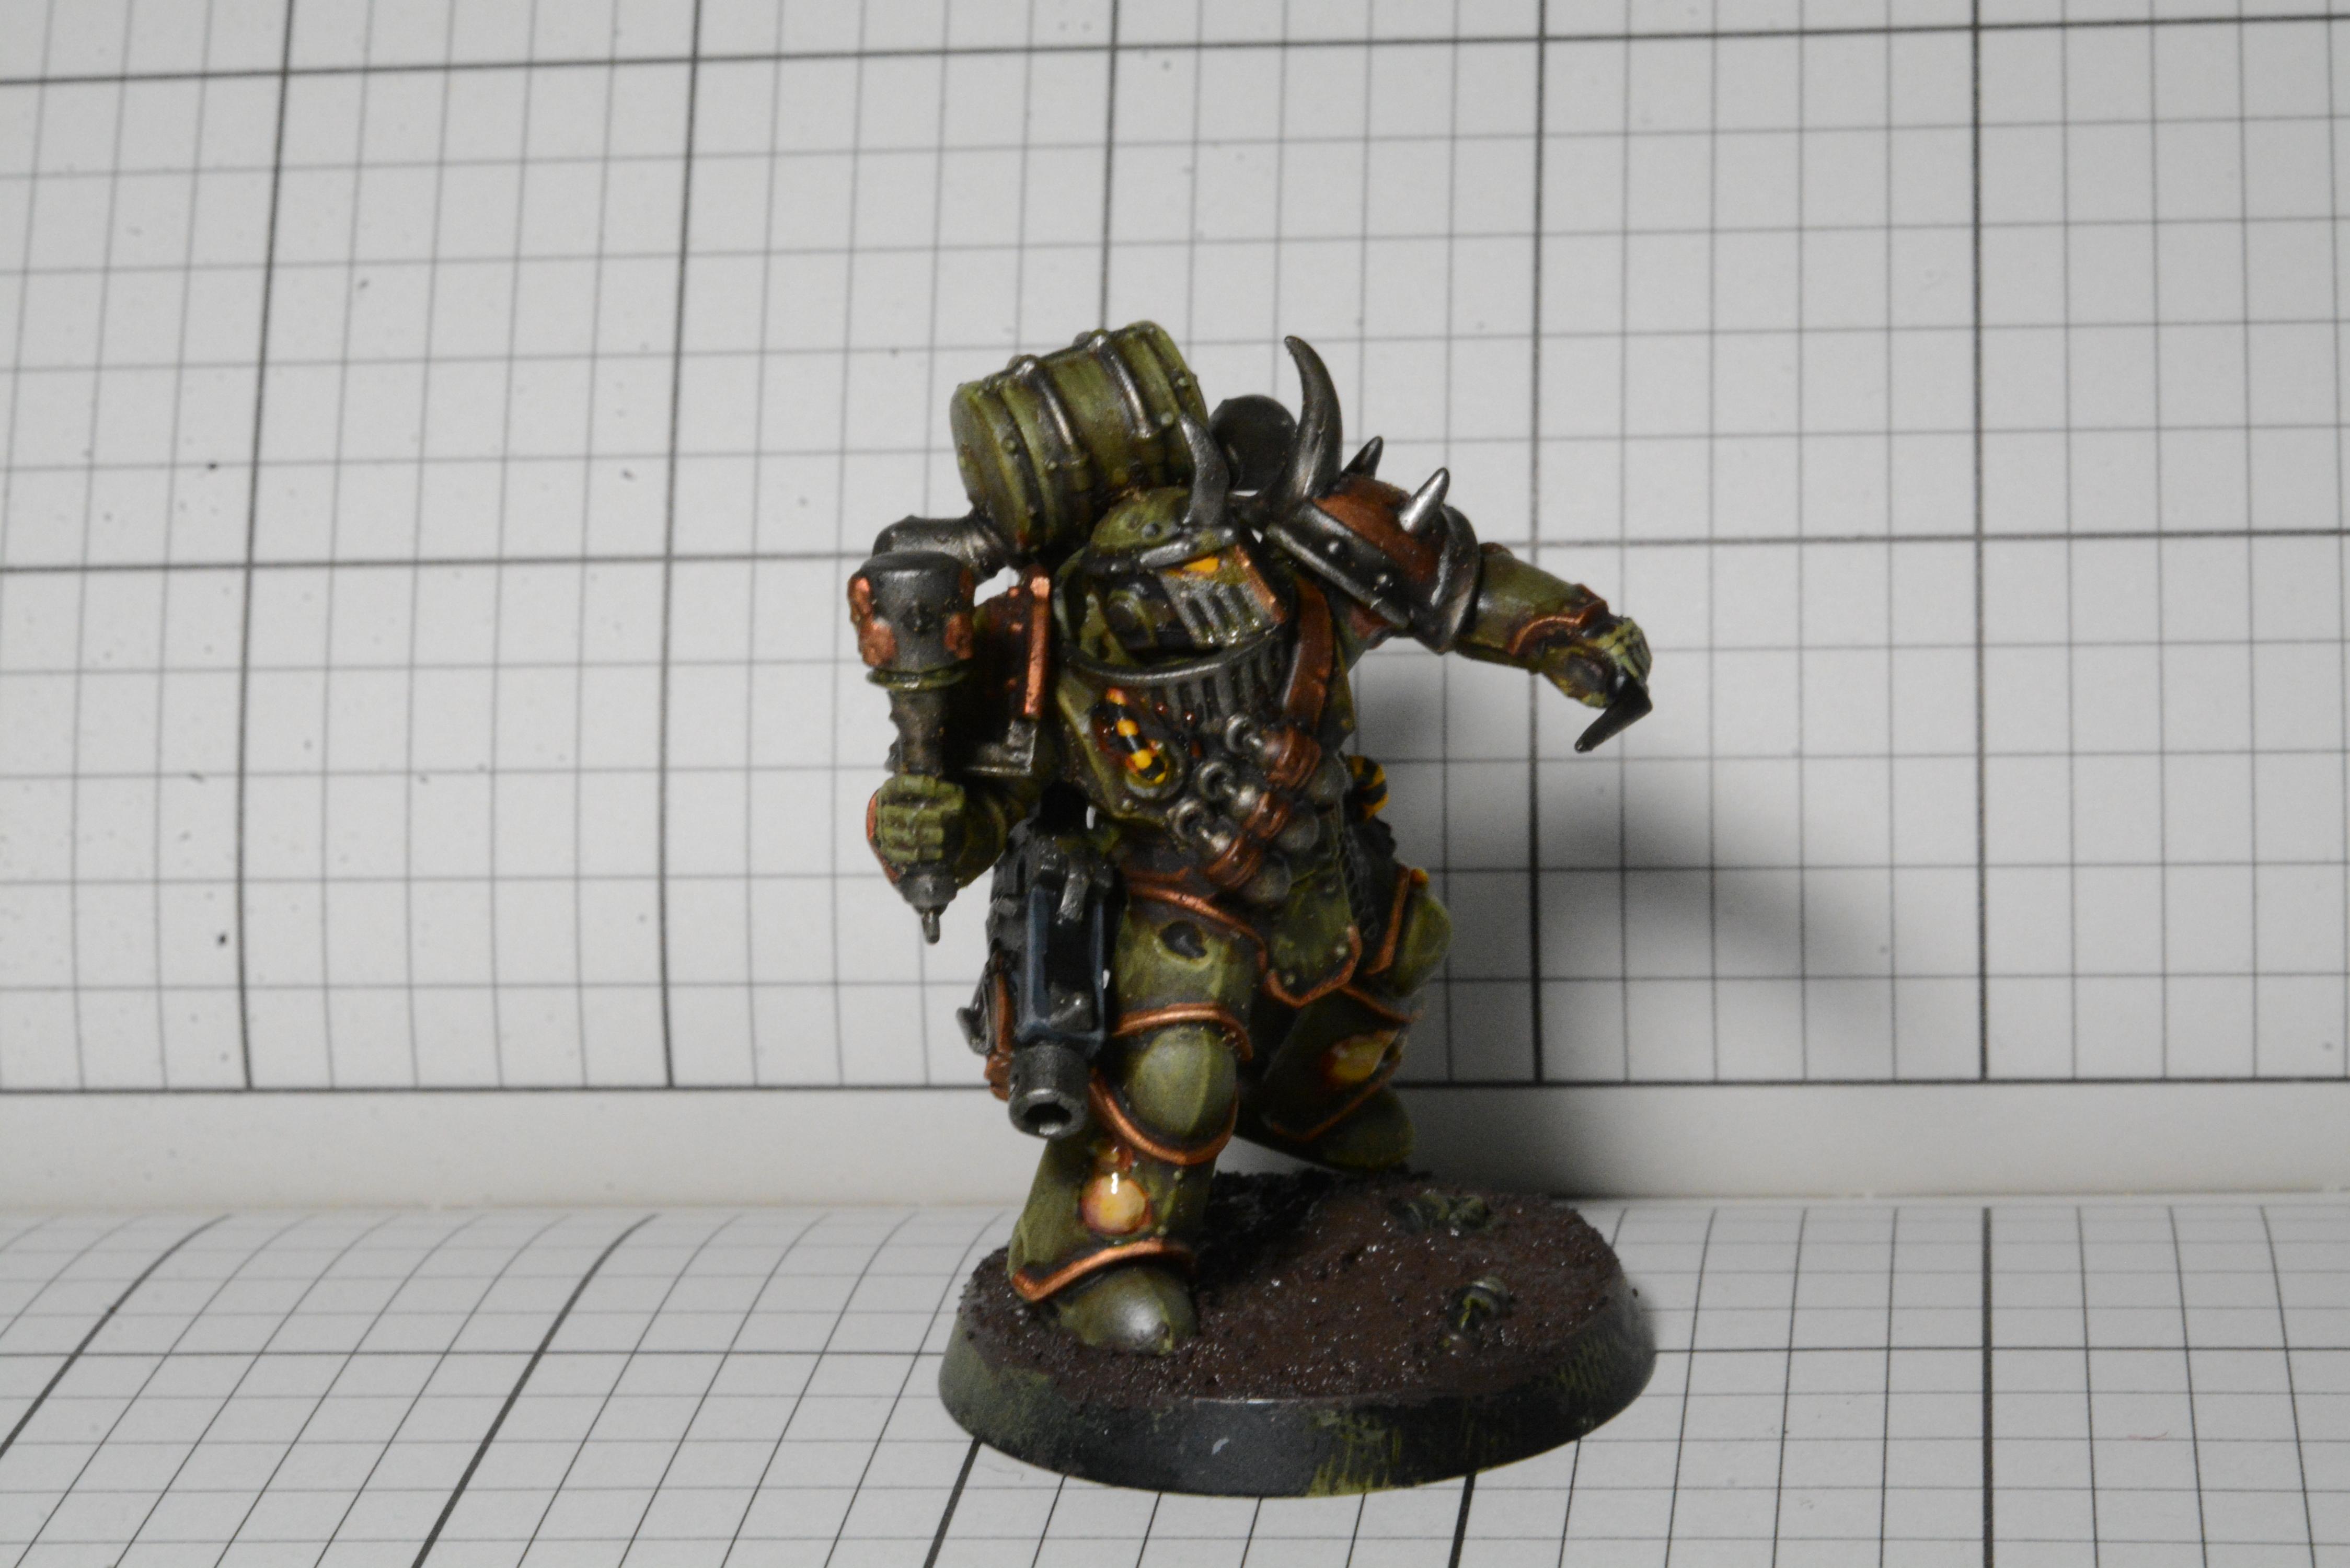 Battle Damage, Body Horror, Chaos, Chaos Space Marines, Corrosion, Corruption, Death Guard, Decay, Gore, Green, Nurgle, Plague, Plague Marines, Rot, Rust, Space Marine Heroes, Space Marine Heroes 3, Warhammer 40,000, Weathered